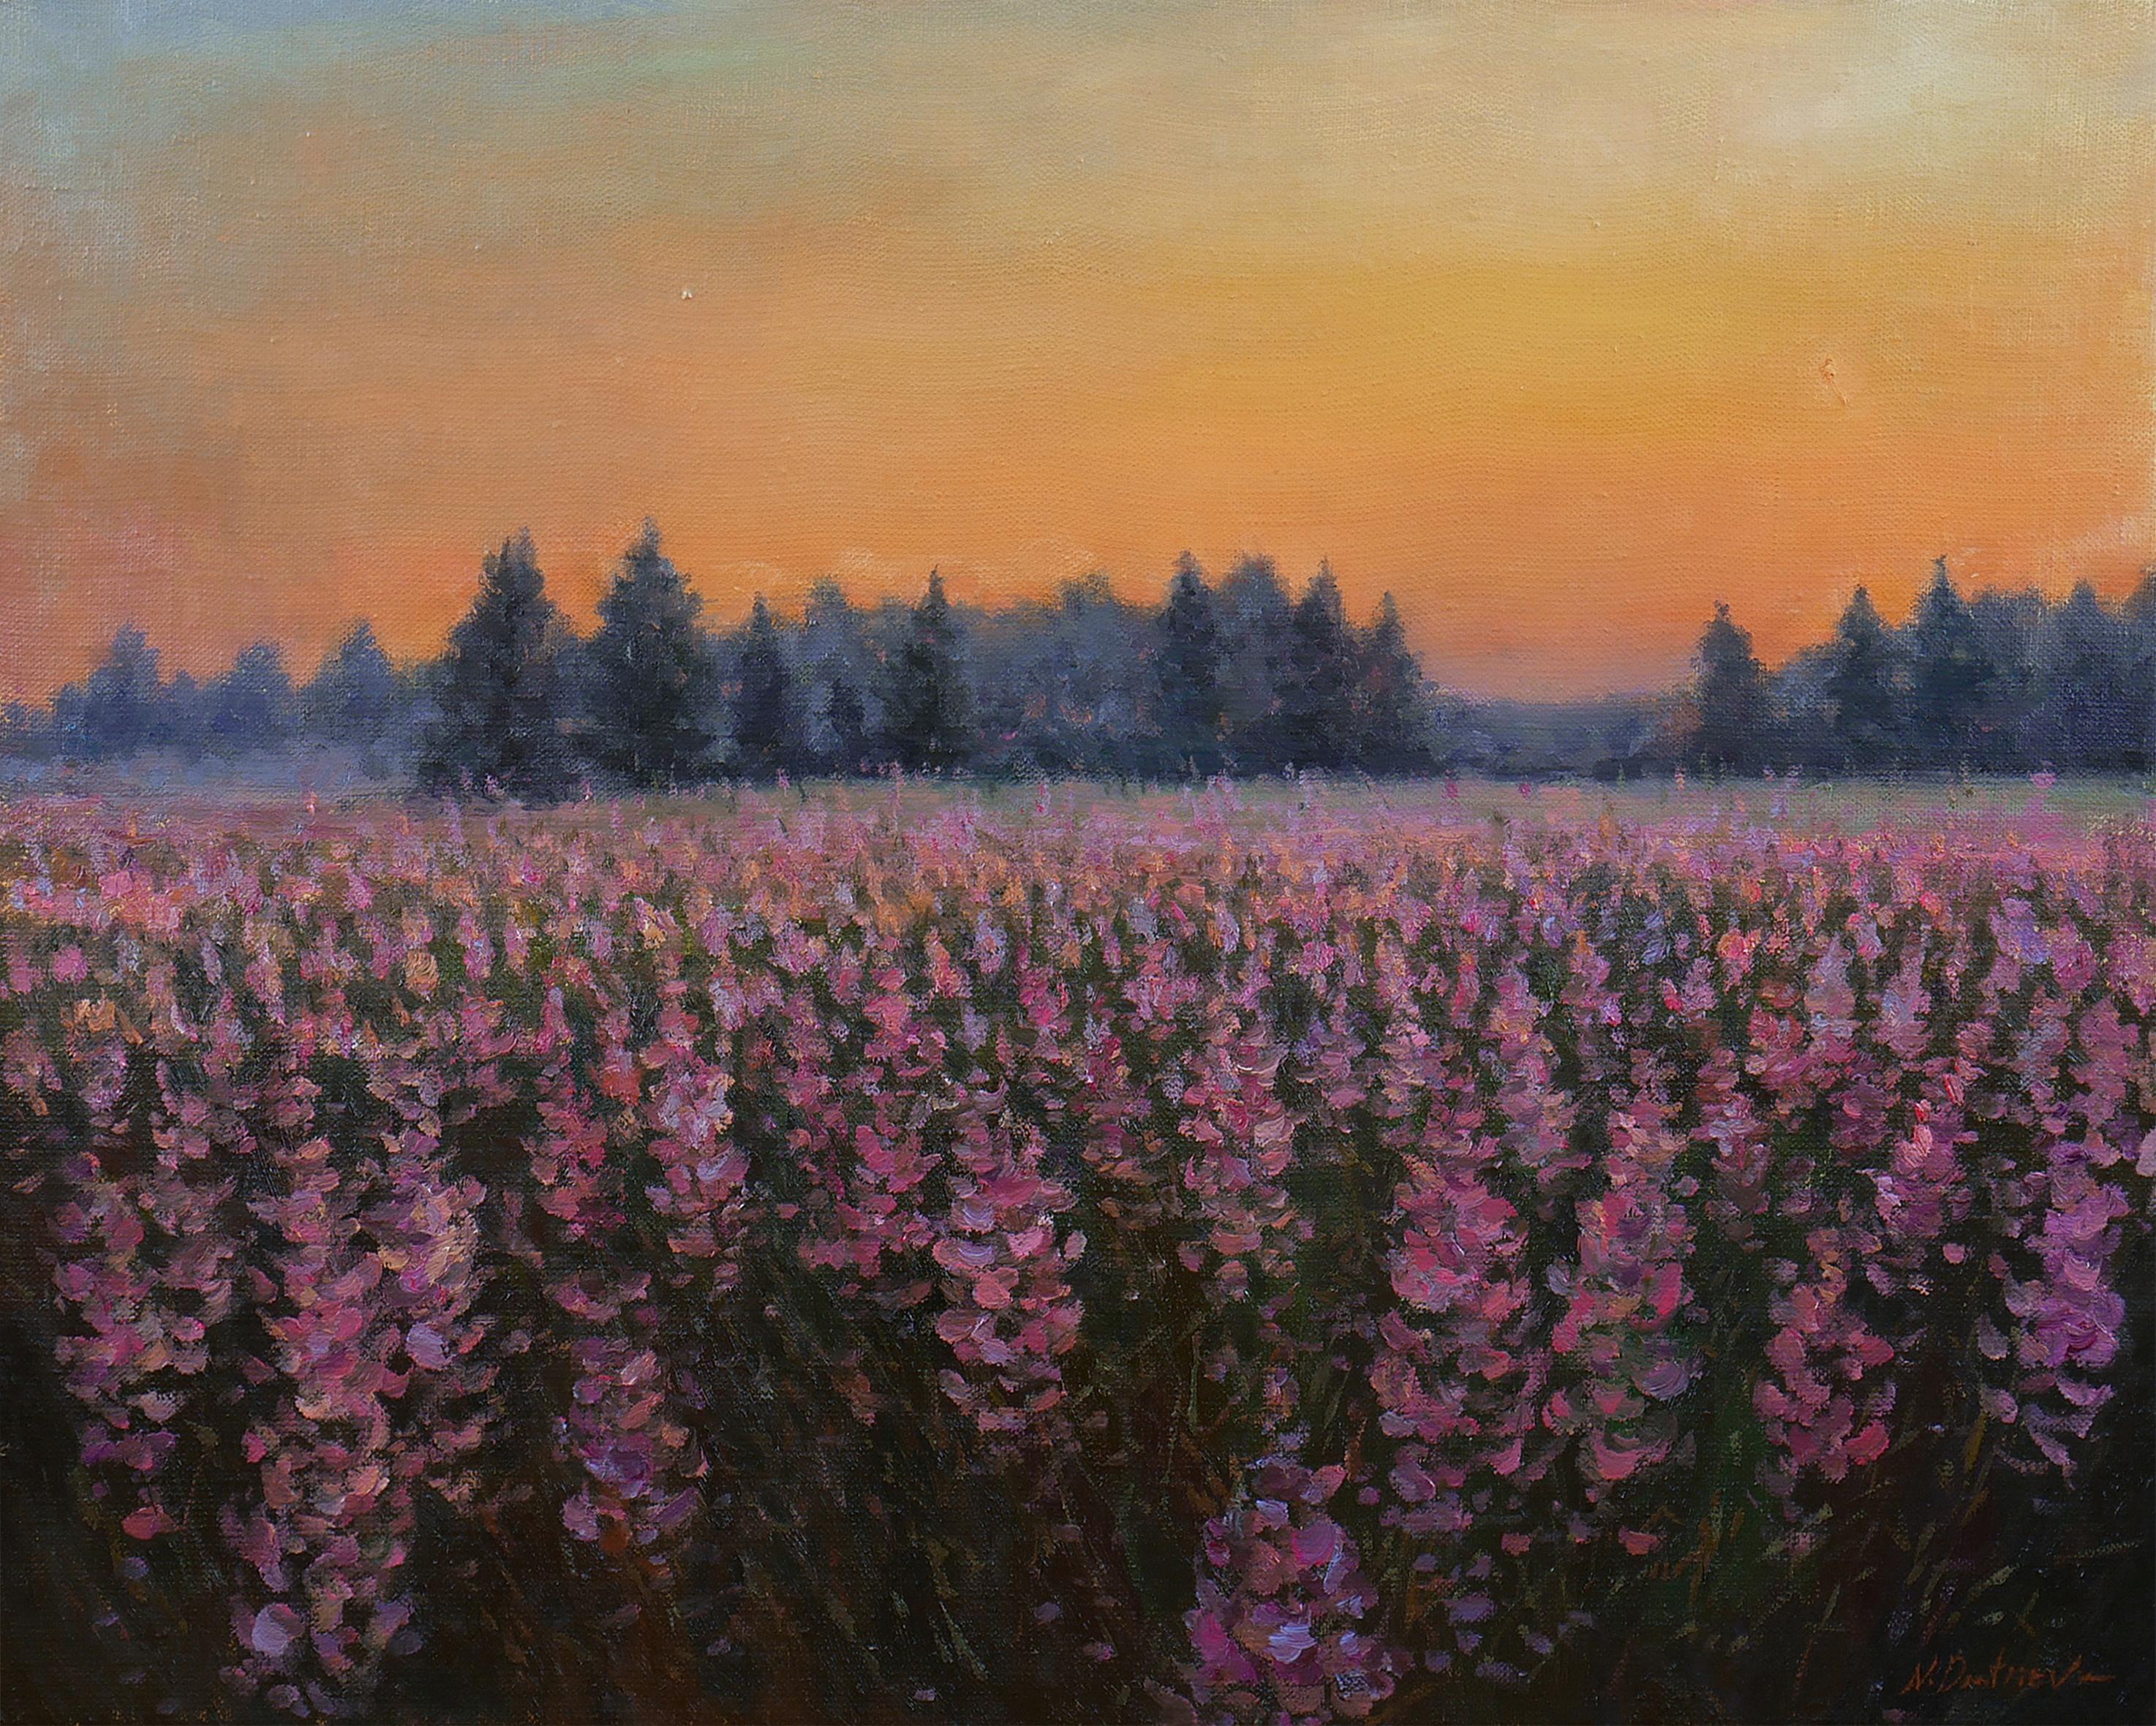 Nikolay Dmitriev Landscape Painting - Sunset Above The Fireweed Field - original summer landscape painting